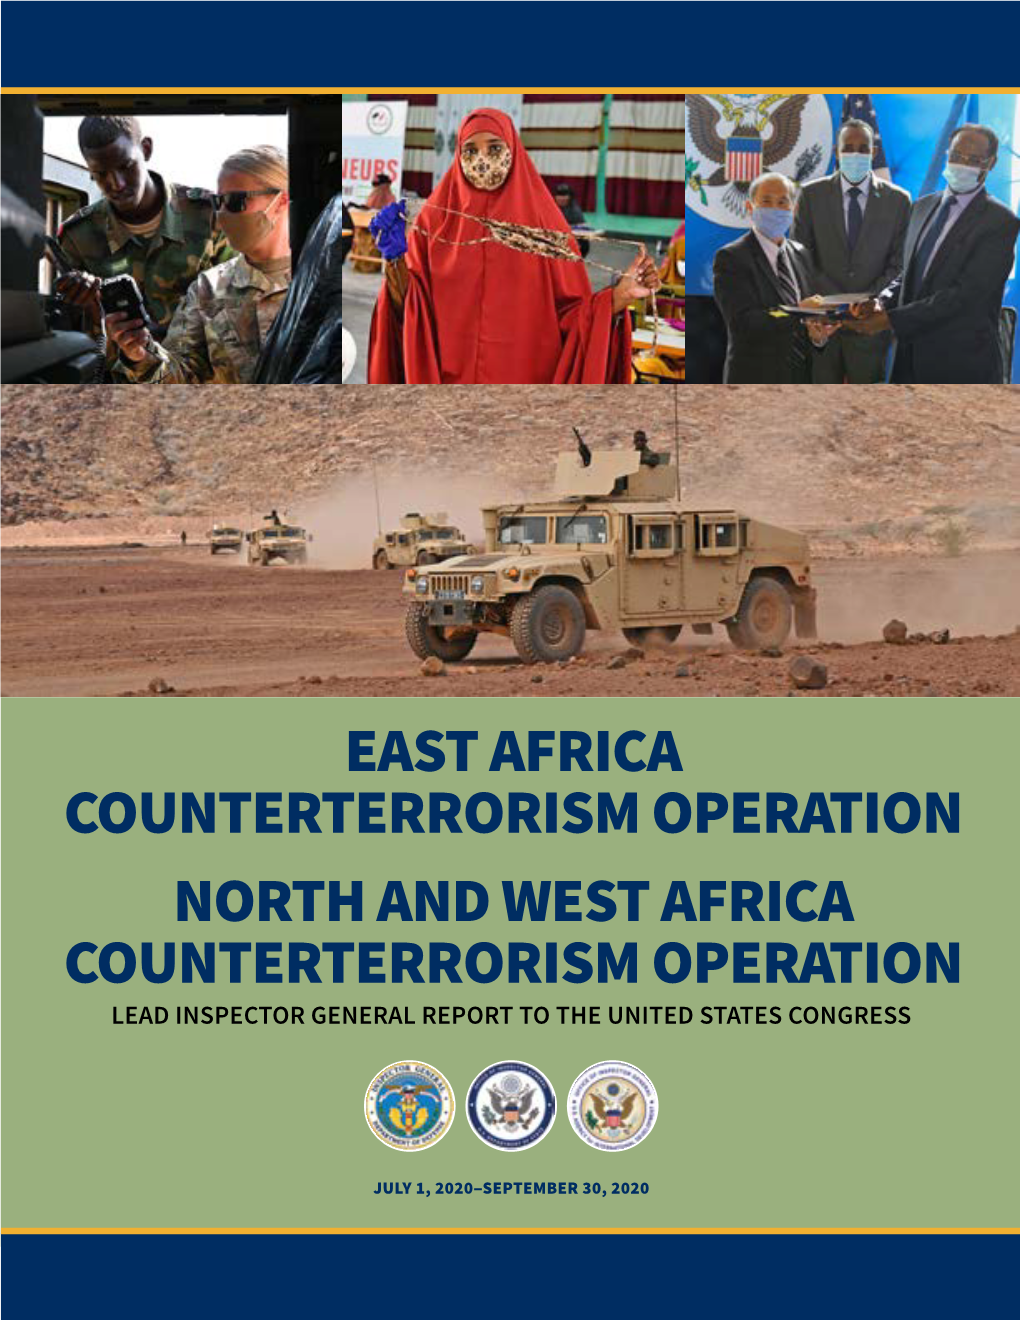 East Africa Counterterrorism Operation, North and West Africa